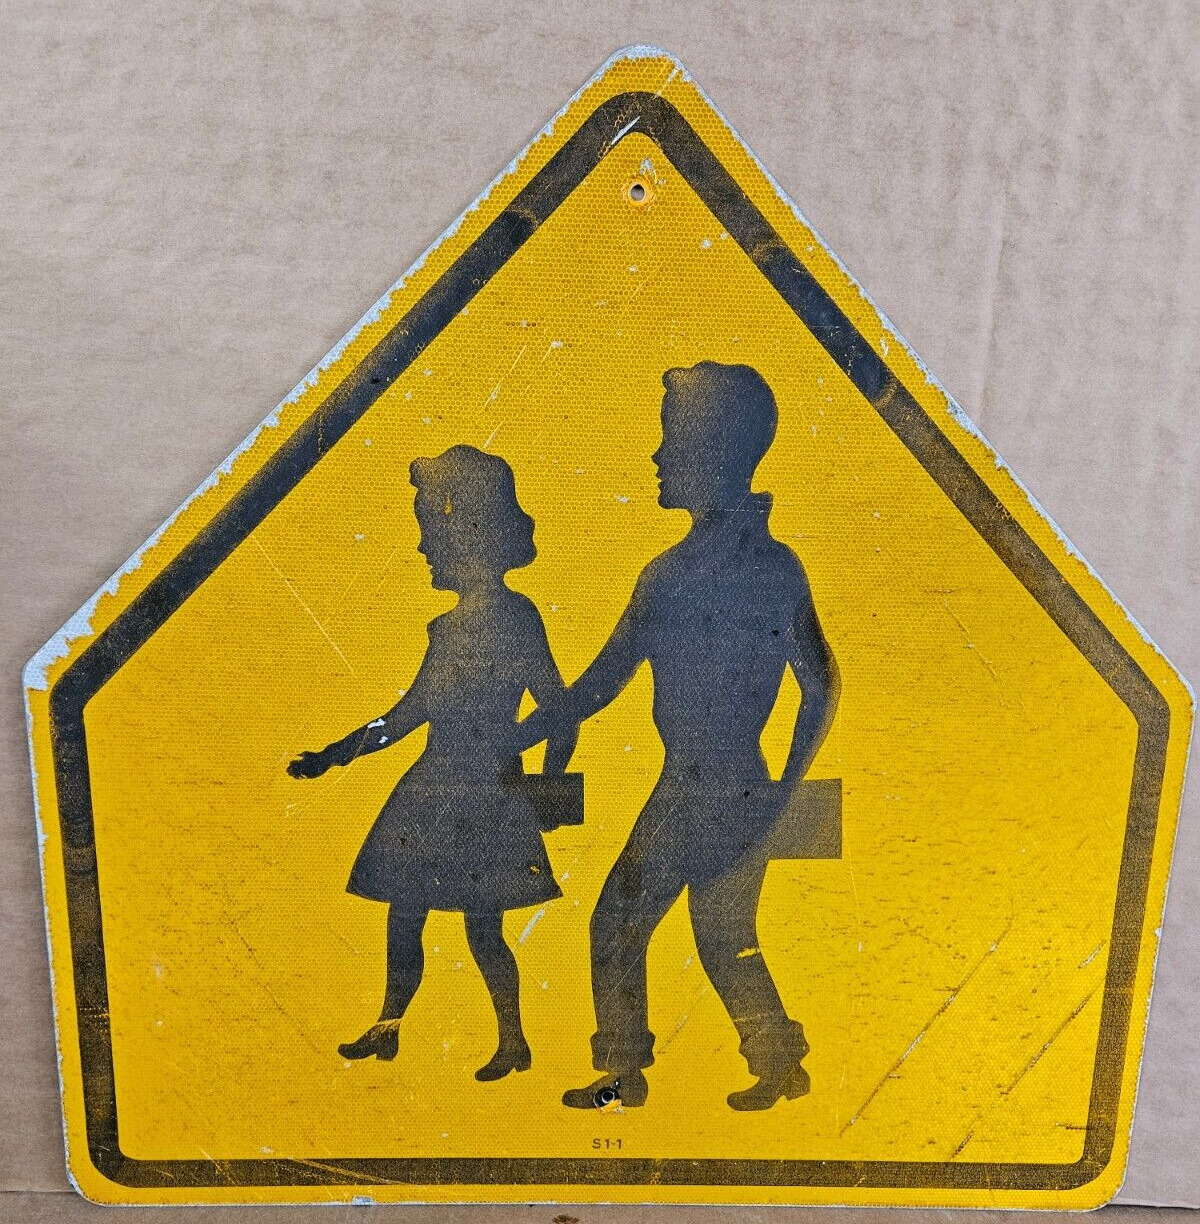 RARE Vintage Children At Play Sign School Crossing Metal Safety Sign